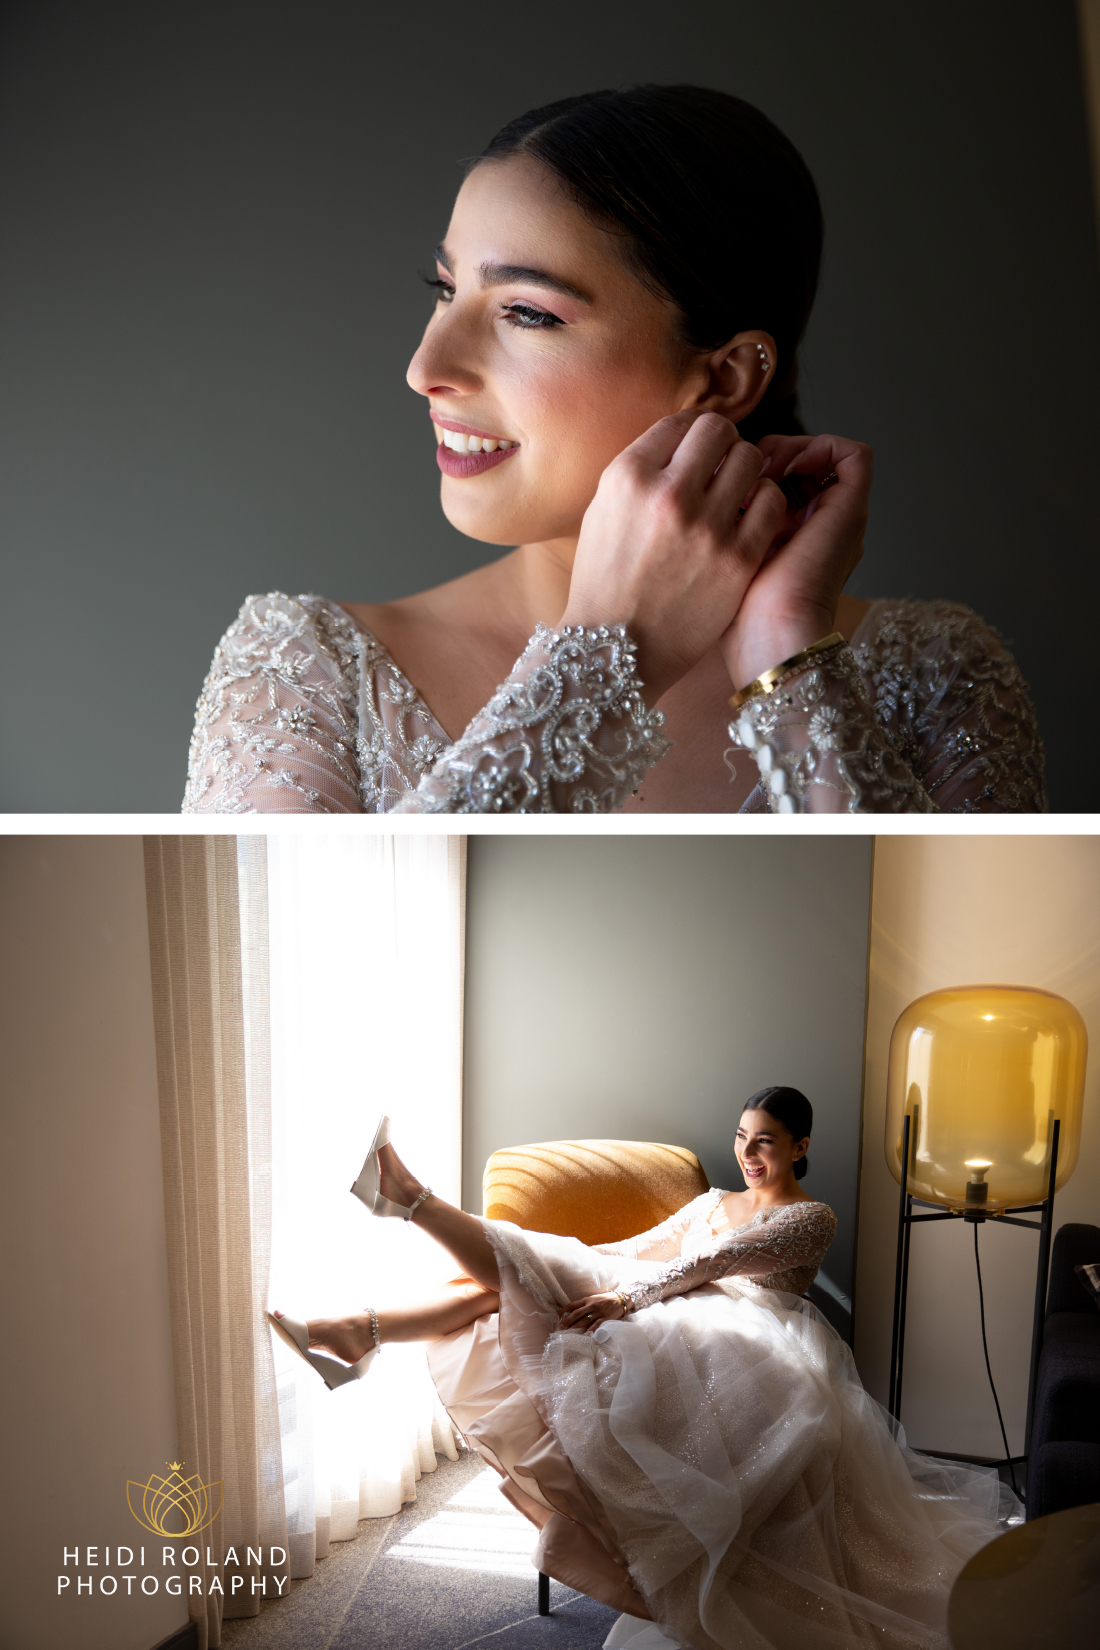 Bride having fun on wedding day while putting on her earrings and shoes